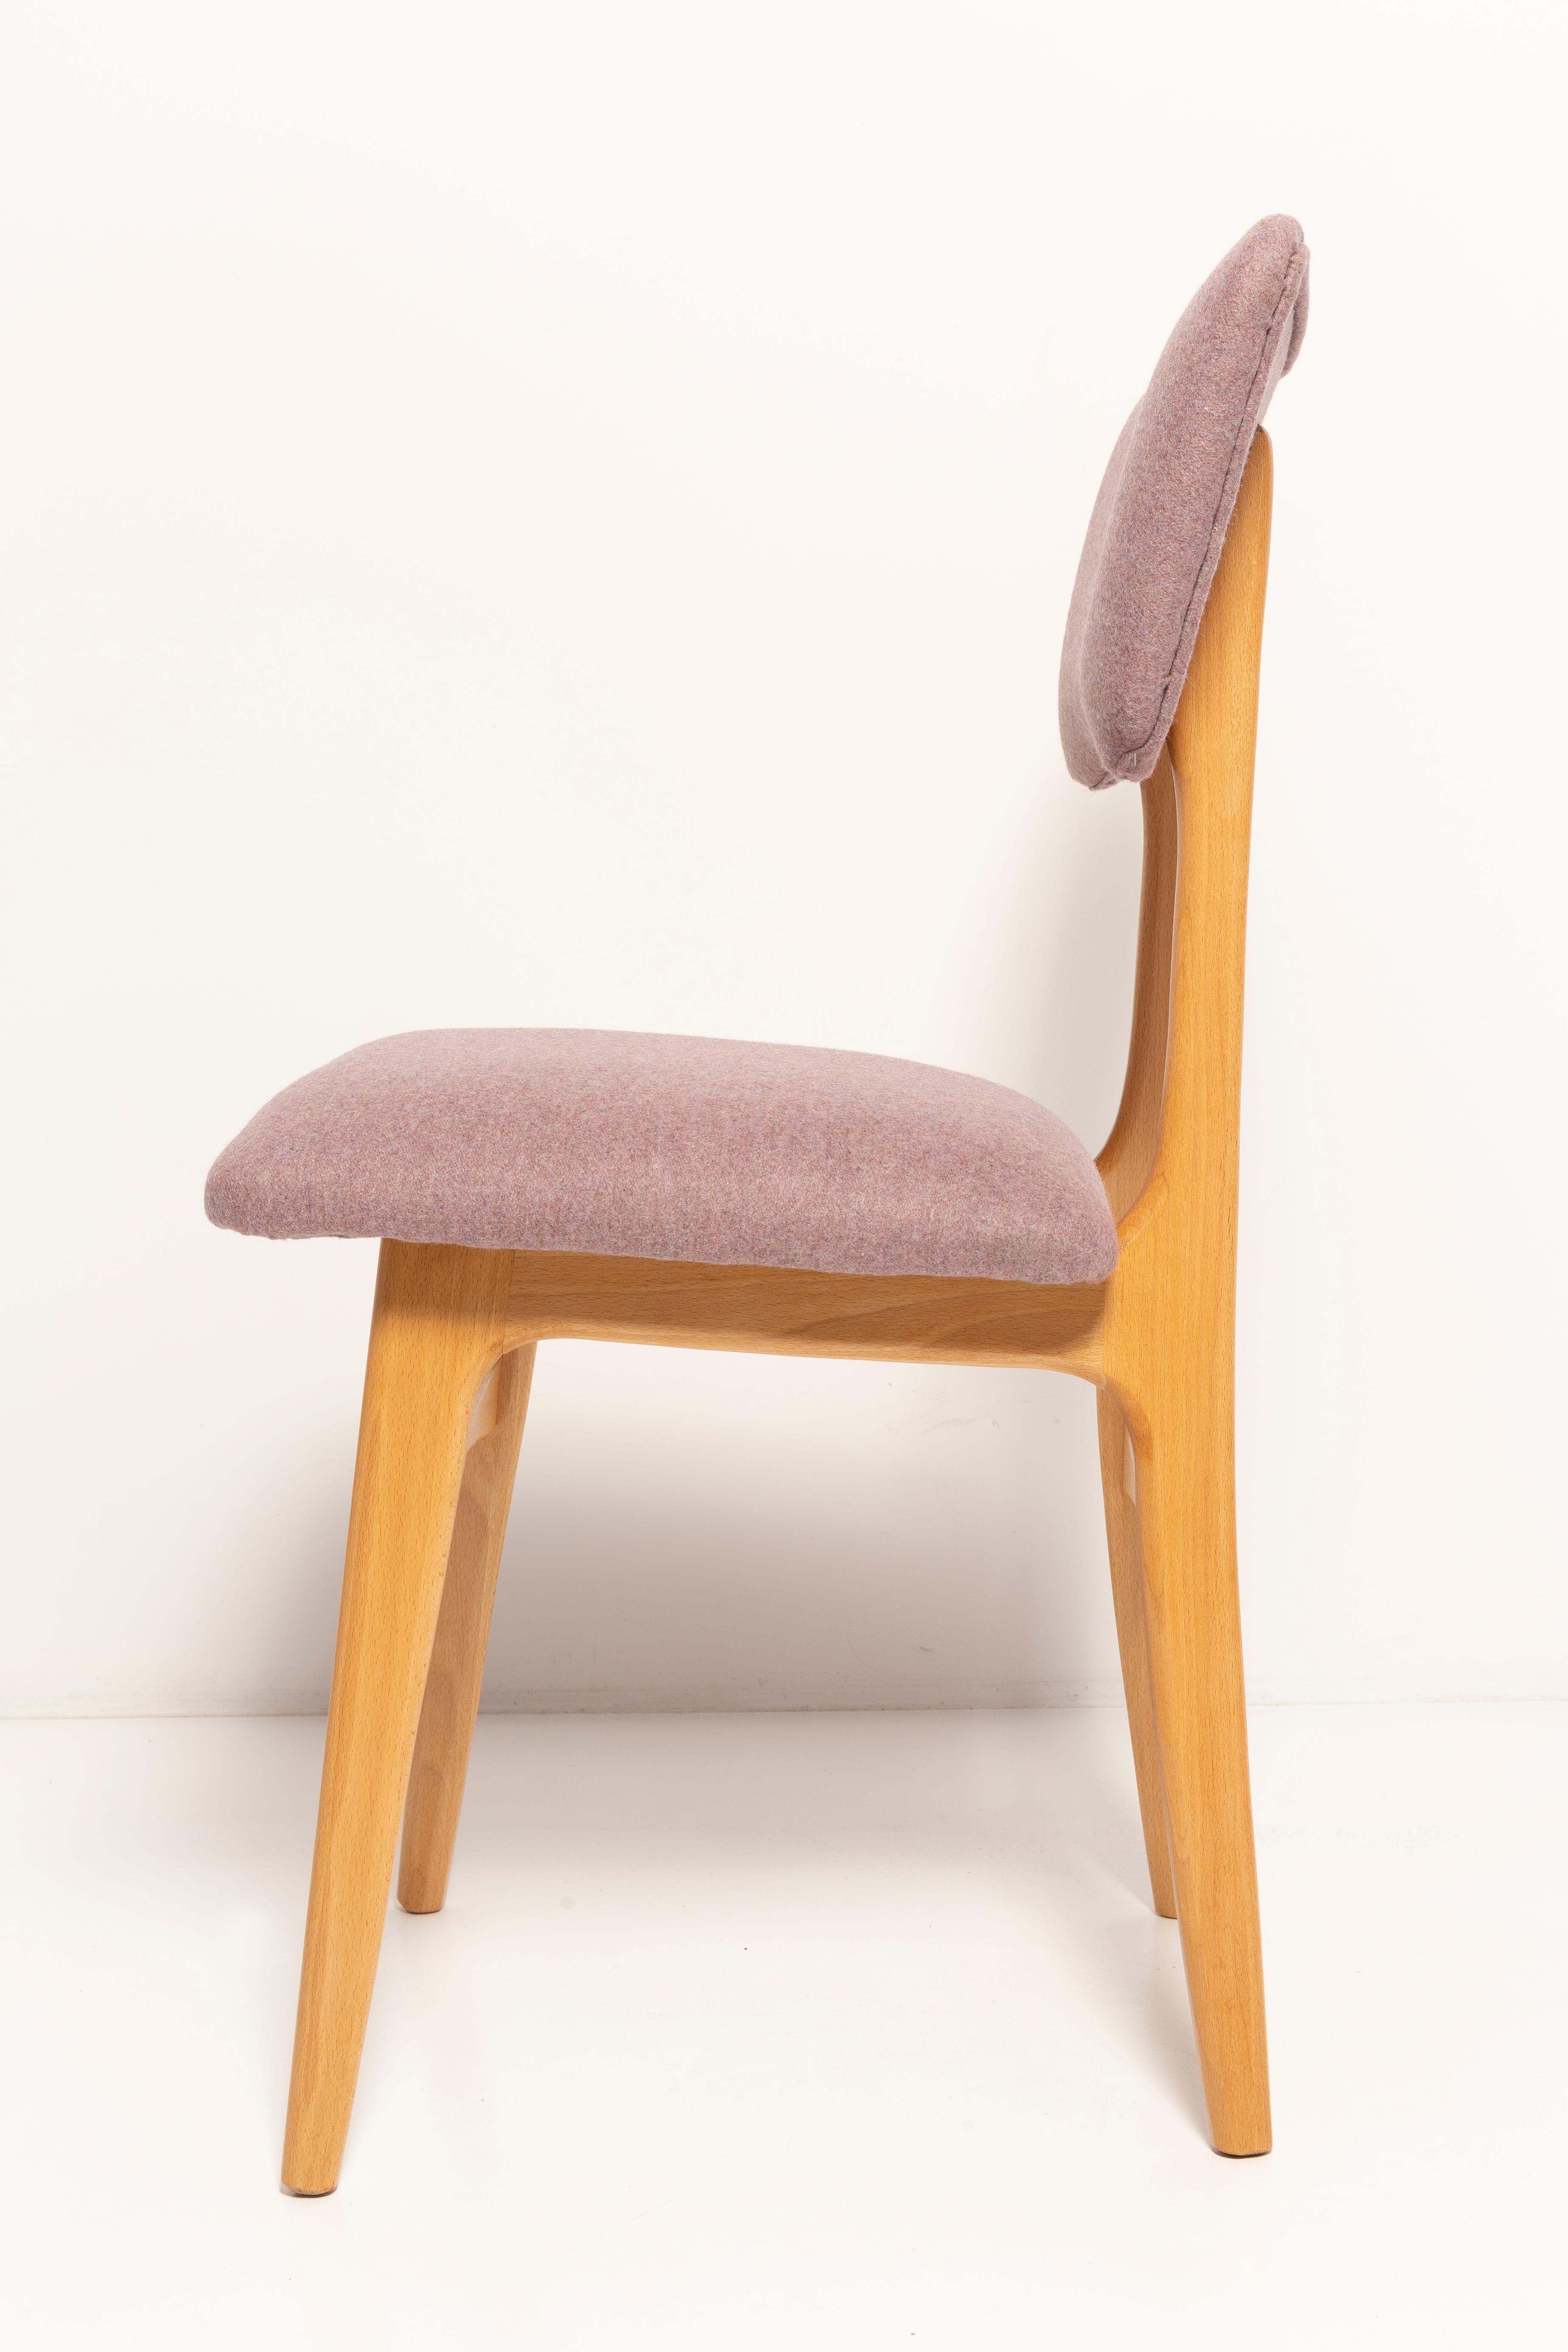 Five 20th Century Butterfly Dining Chairs, Pink Wool, Light Wood, Europe, 1960s For Sale 3